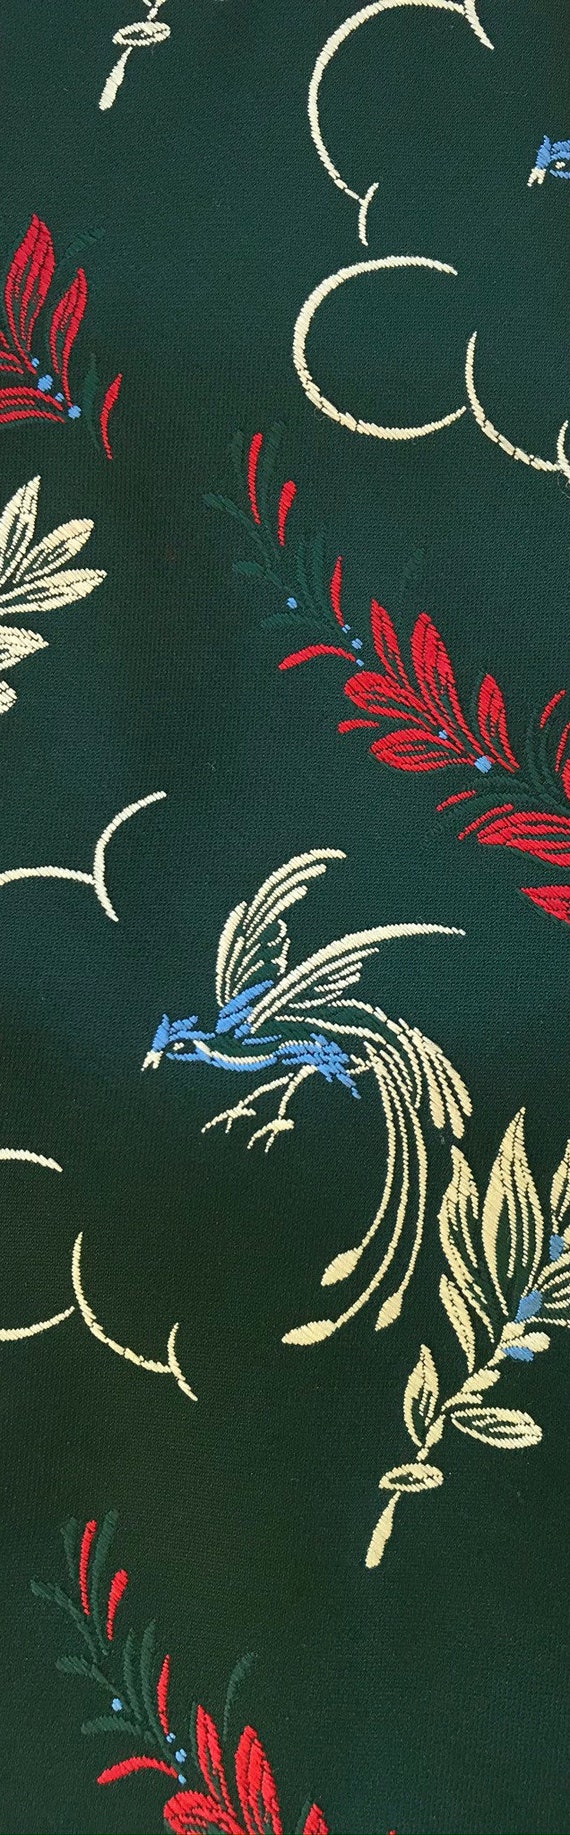 70s Floral Birds Tie, Green Red & White Flowered … - image 3